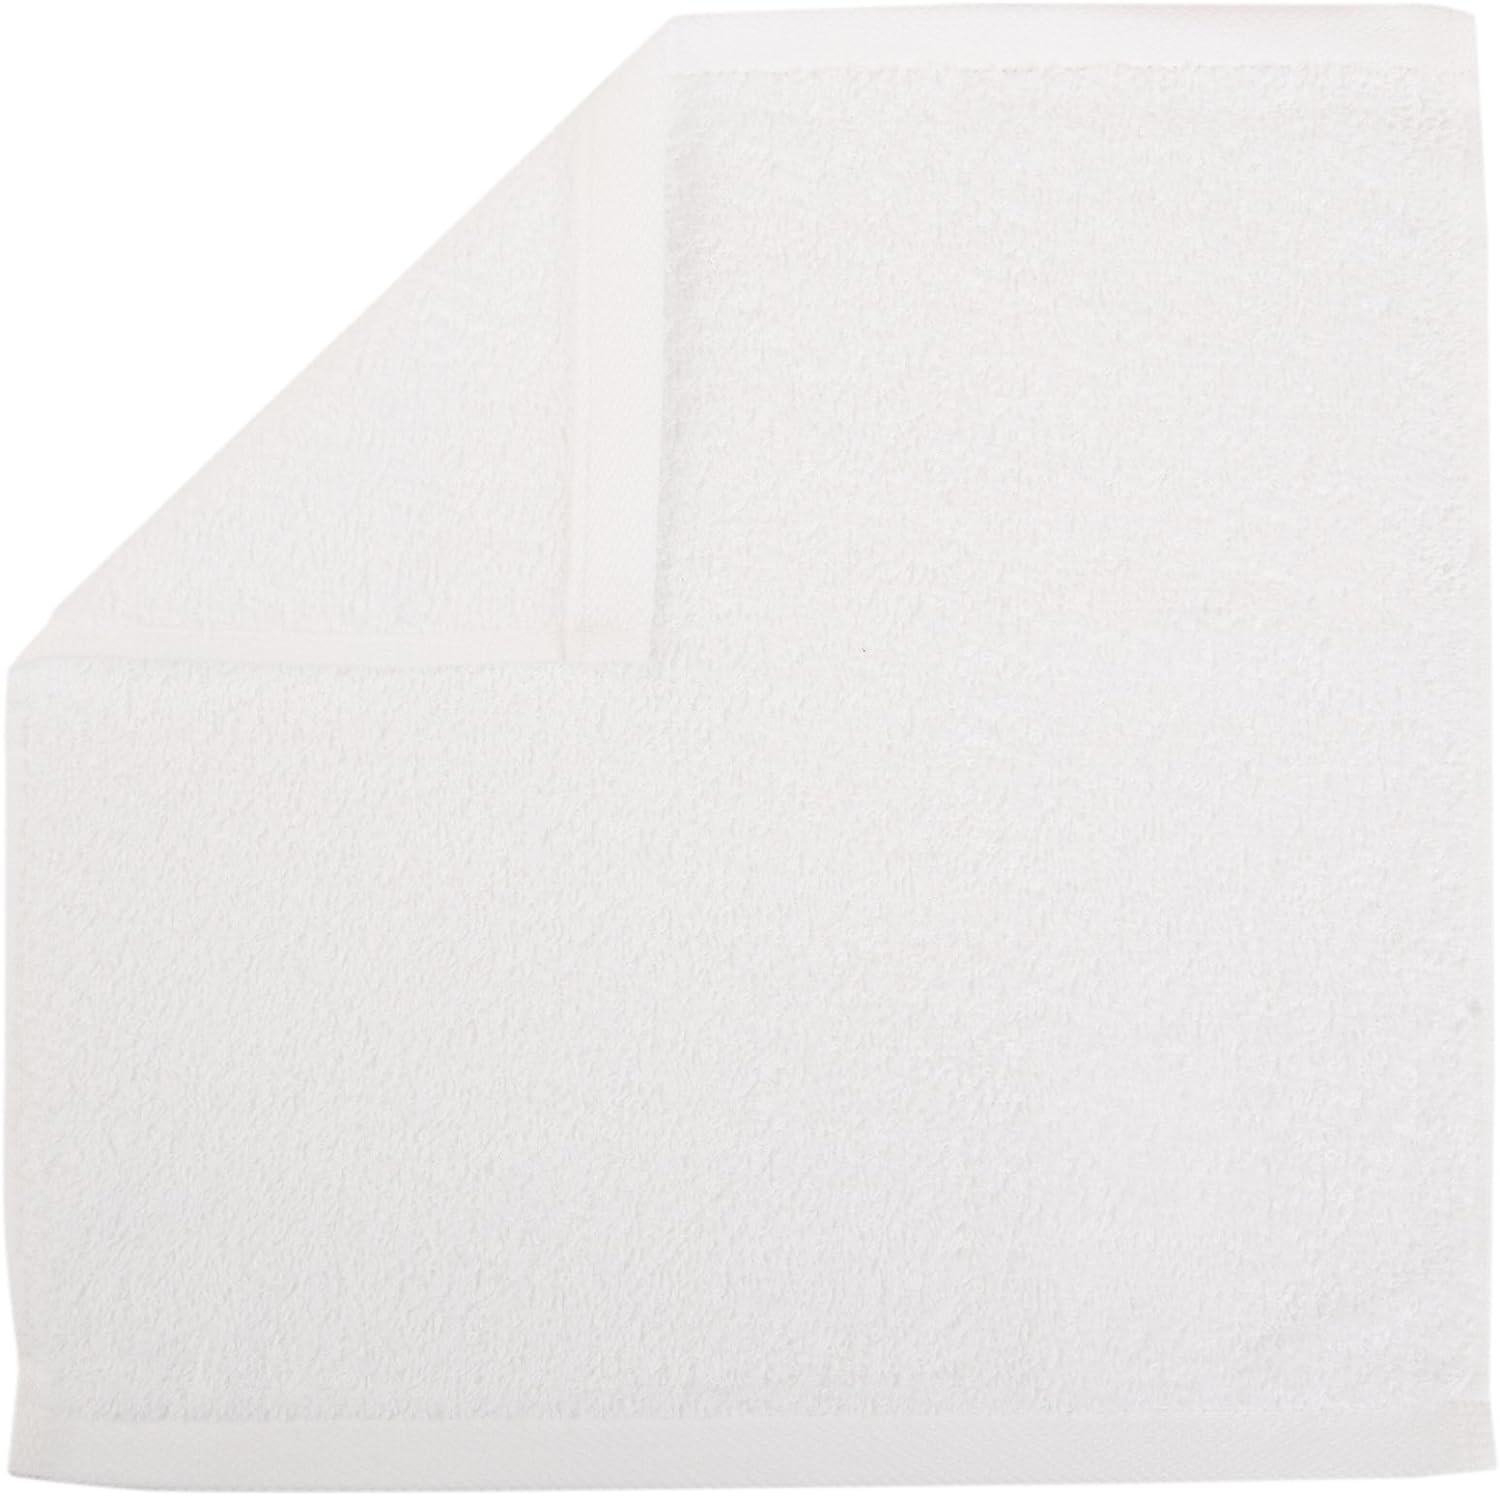 100% Cotton White Washcloths (Pack of 100) – The Clean Store